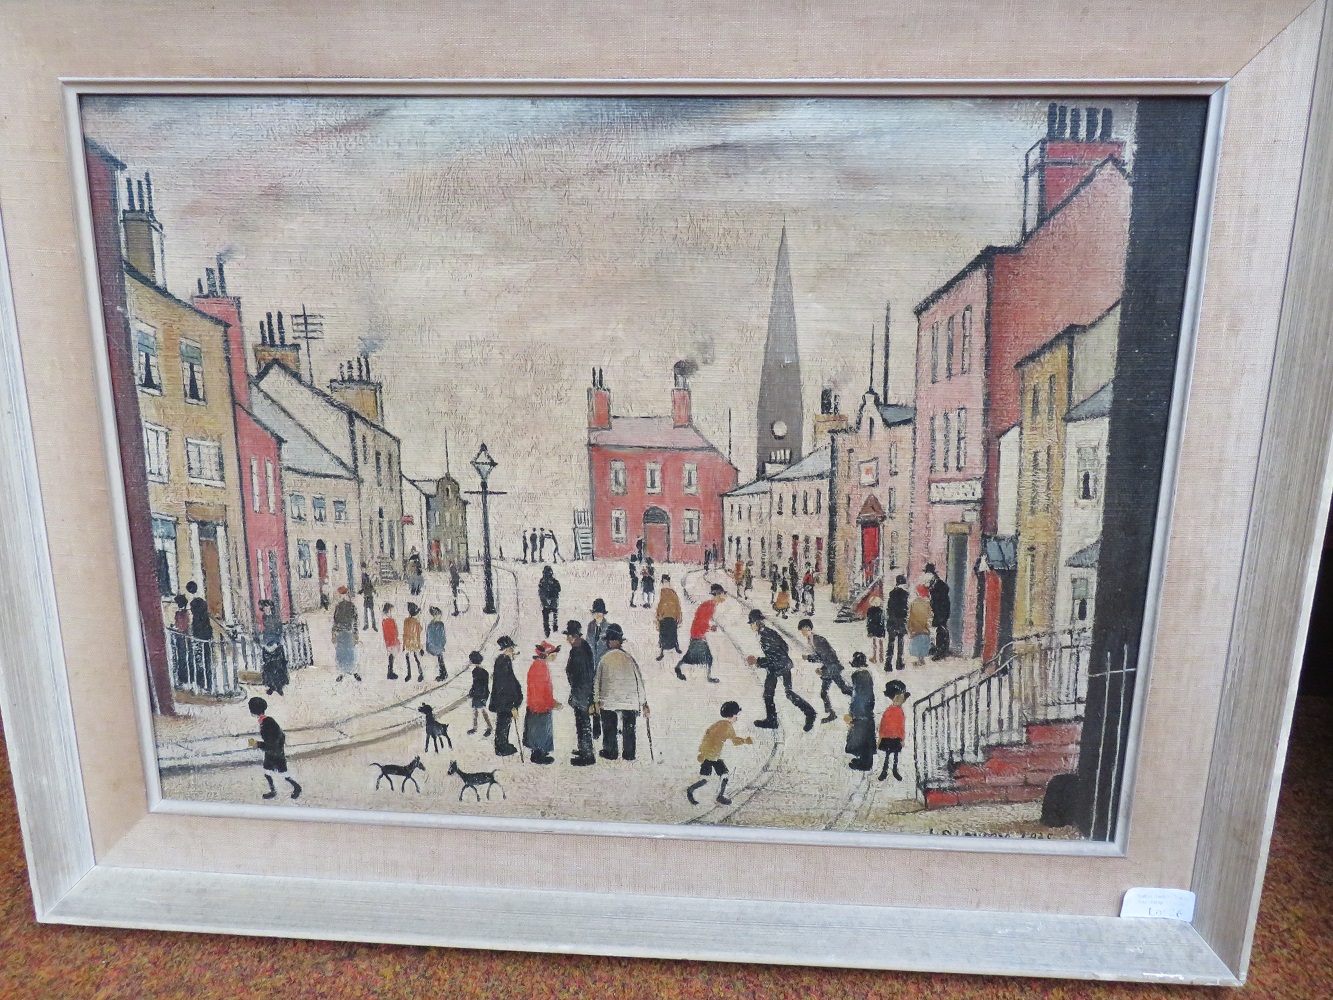 Framed oilograph on canvas, L S Lowry. 47 x 61 cm